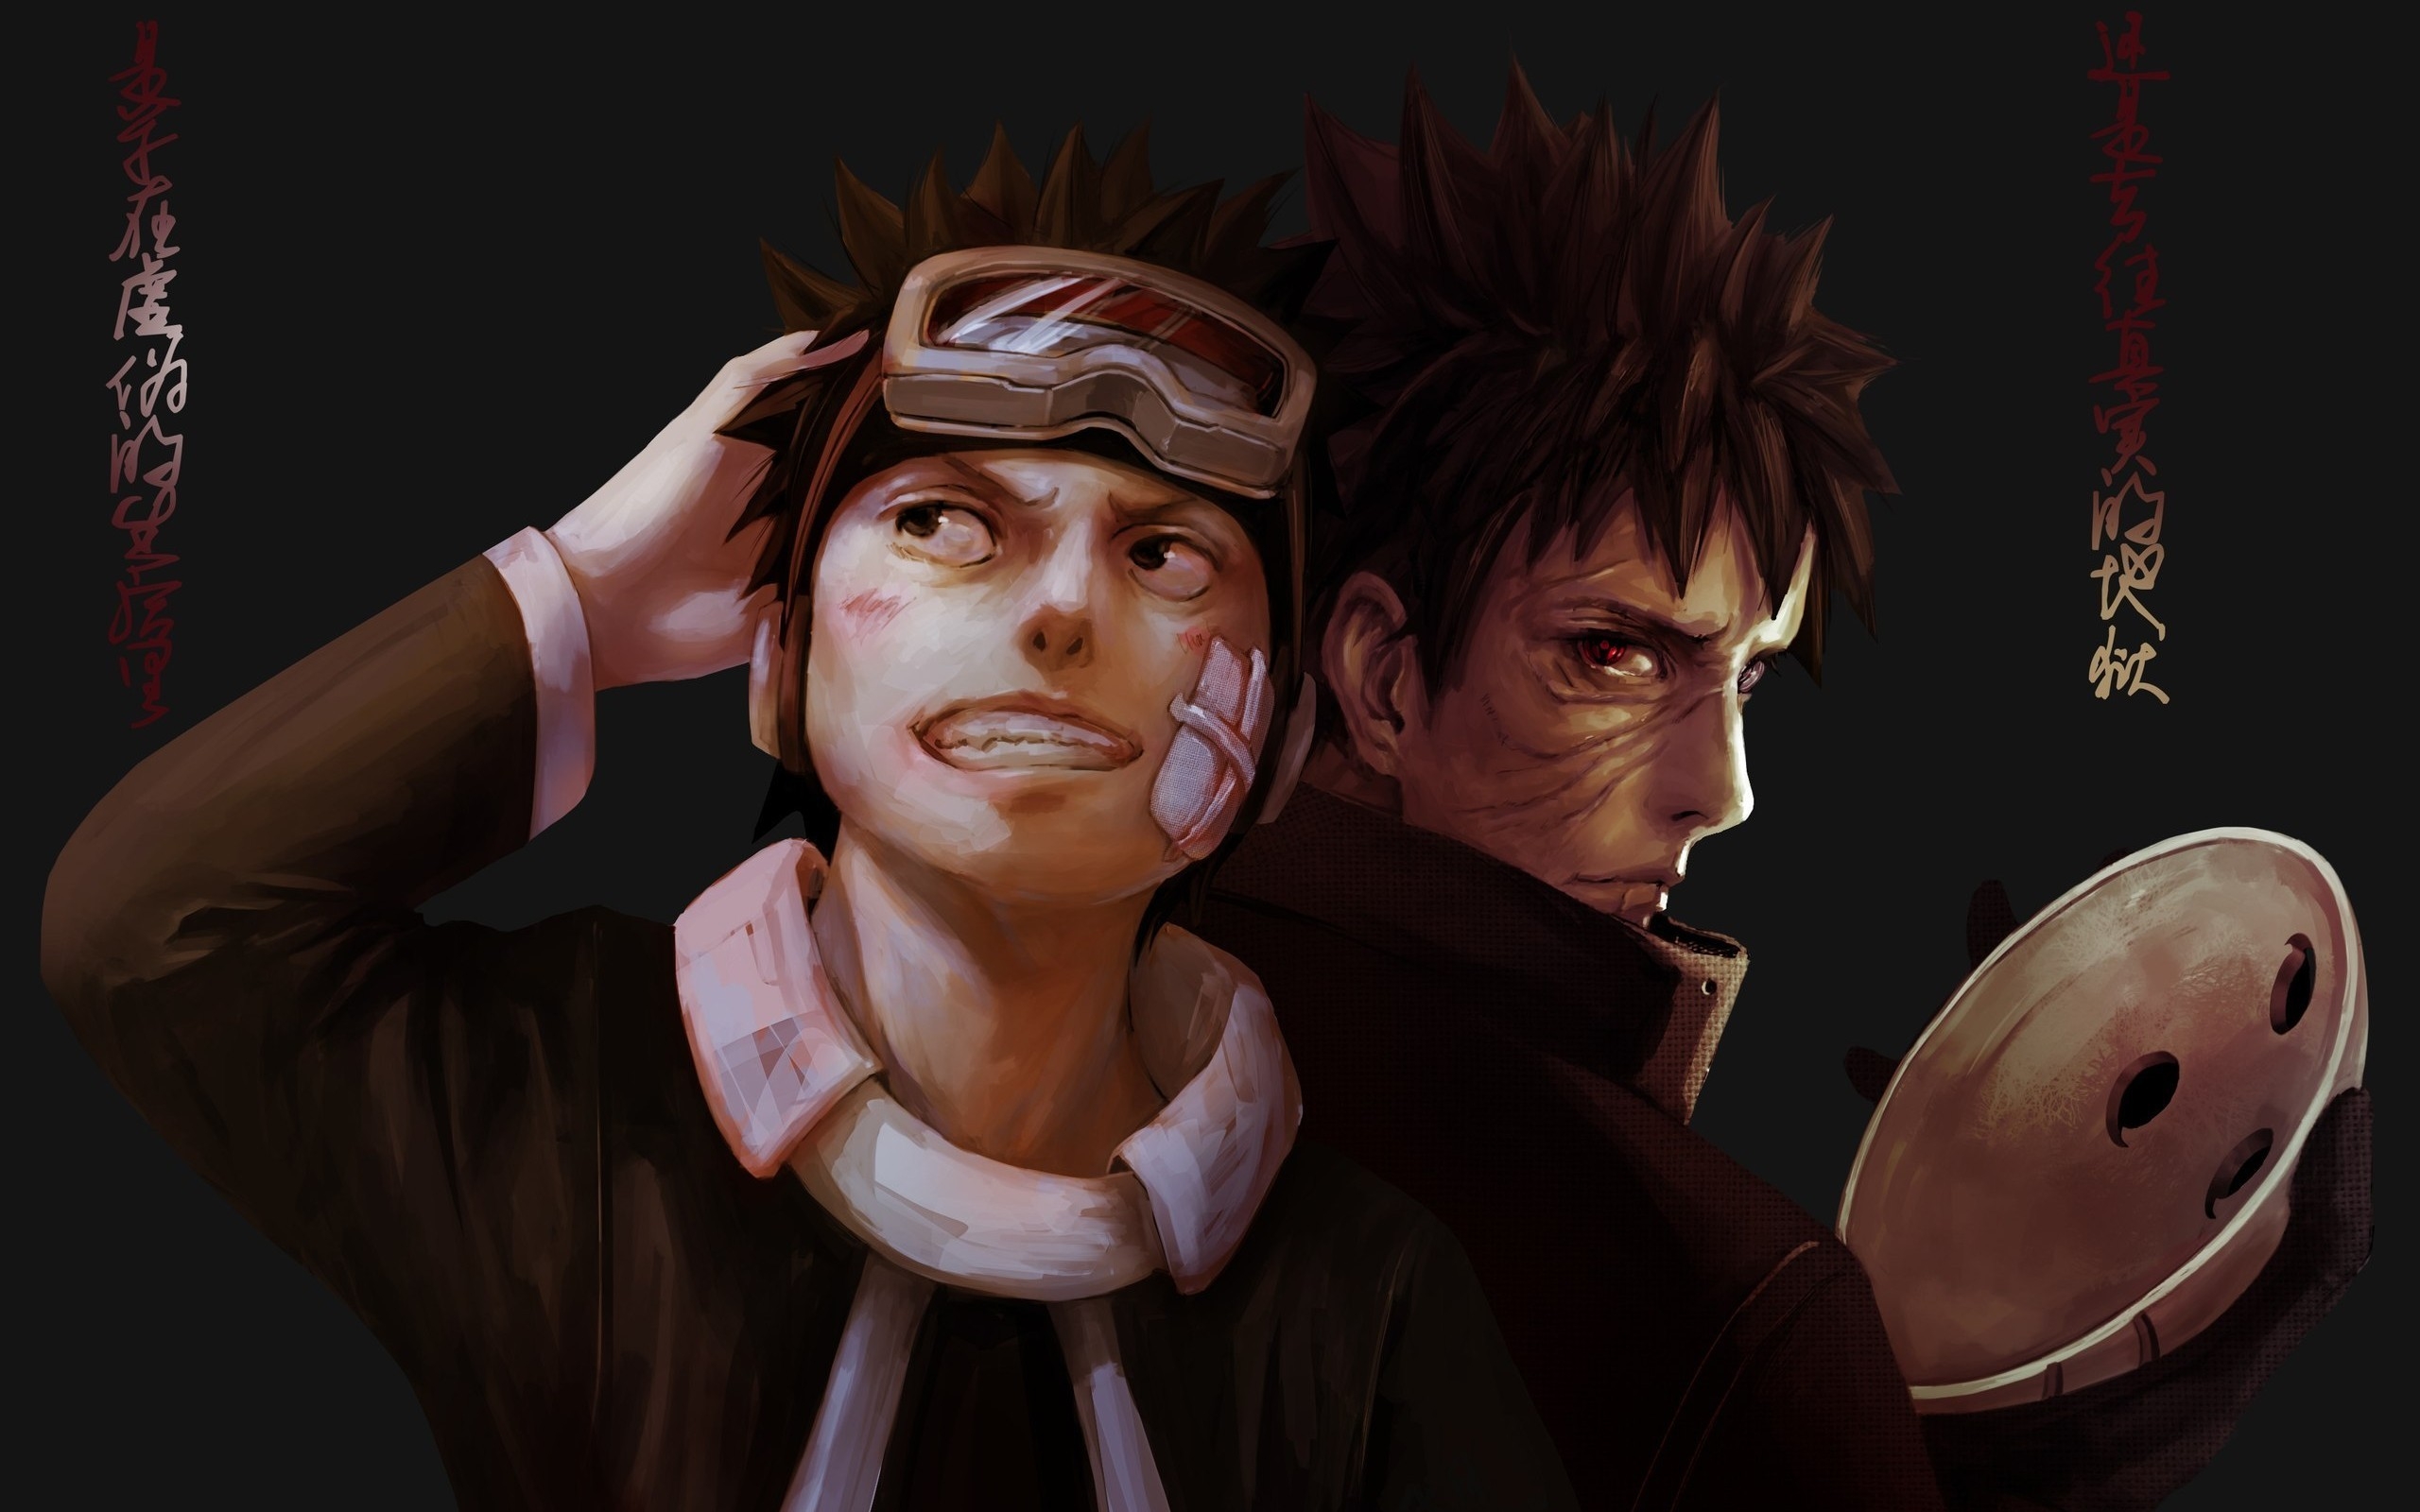 Naruto Style for 2560 x 1600 widescreen resolution